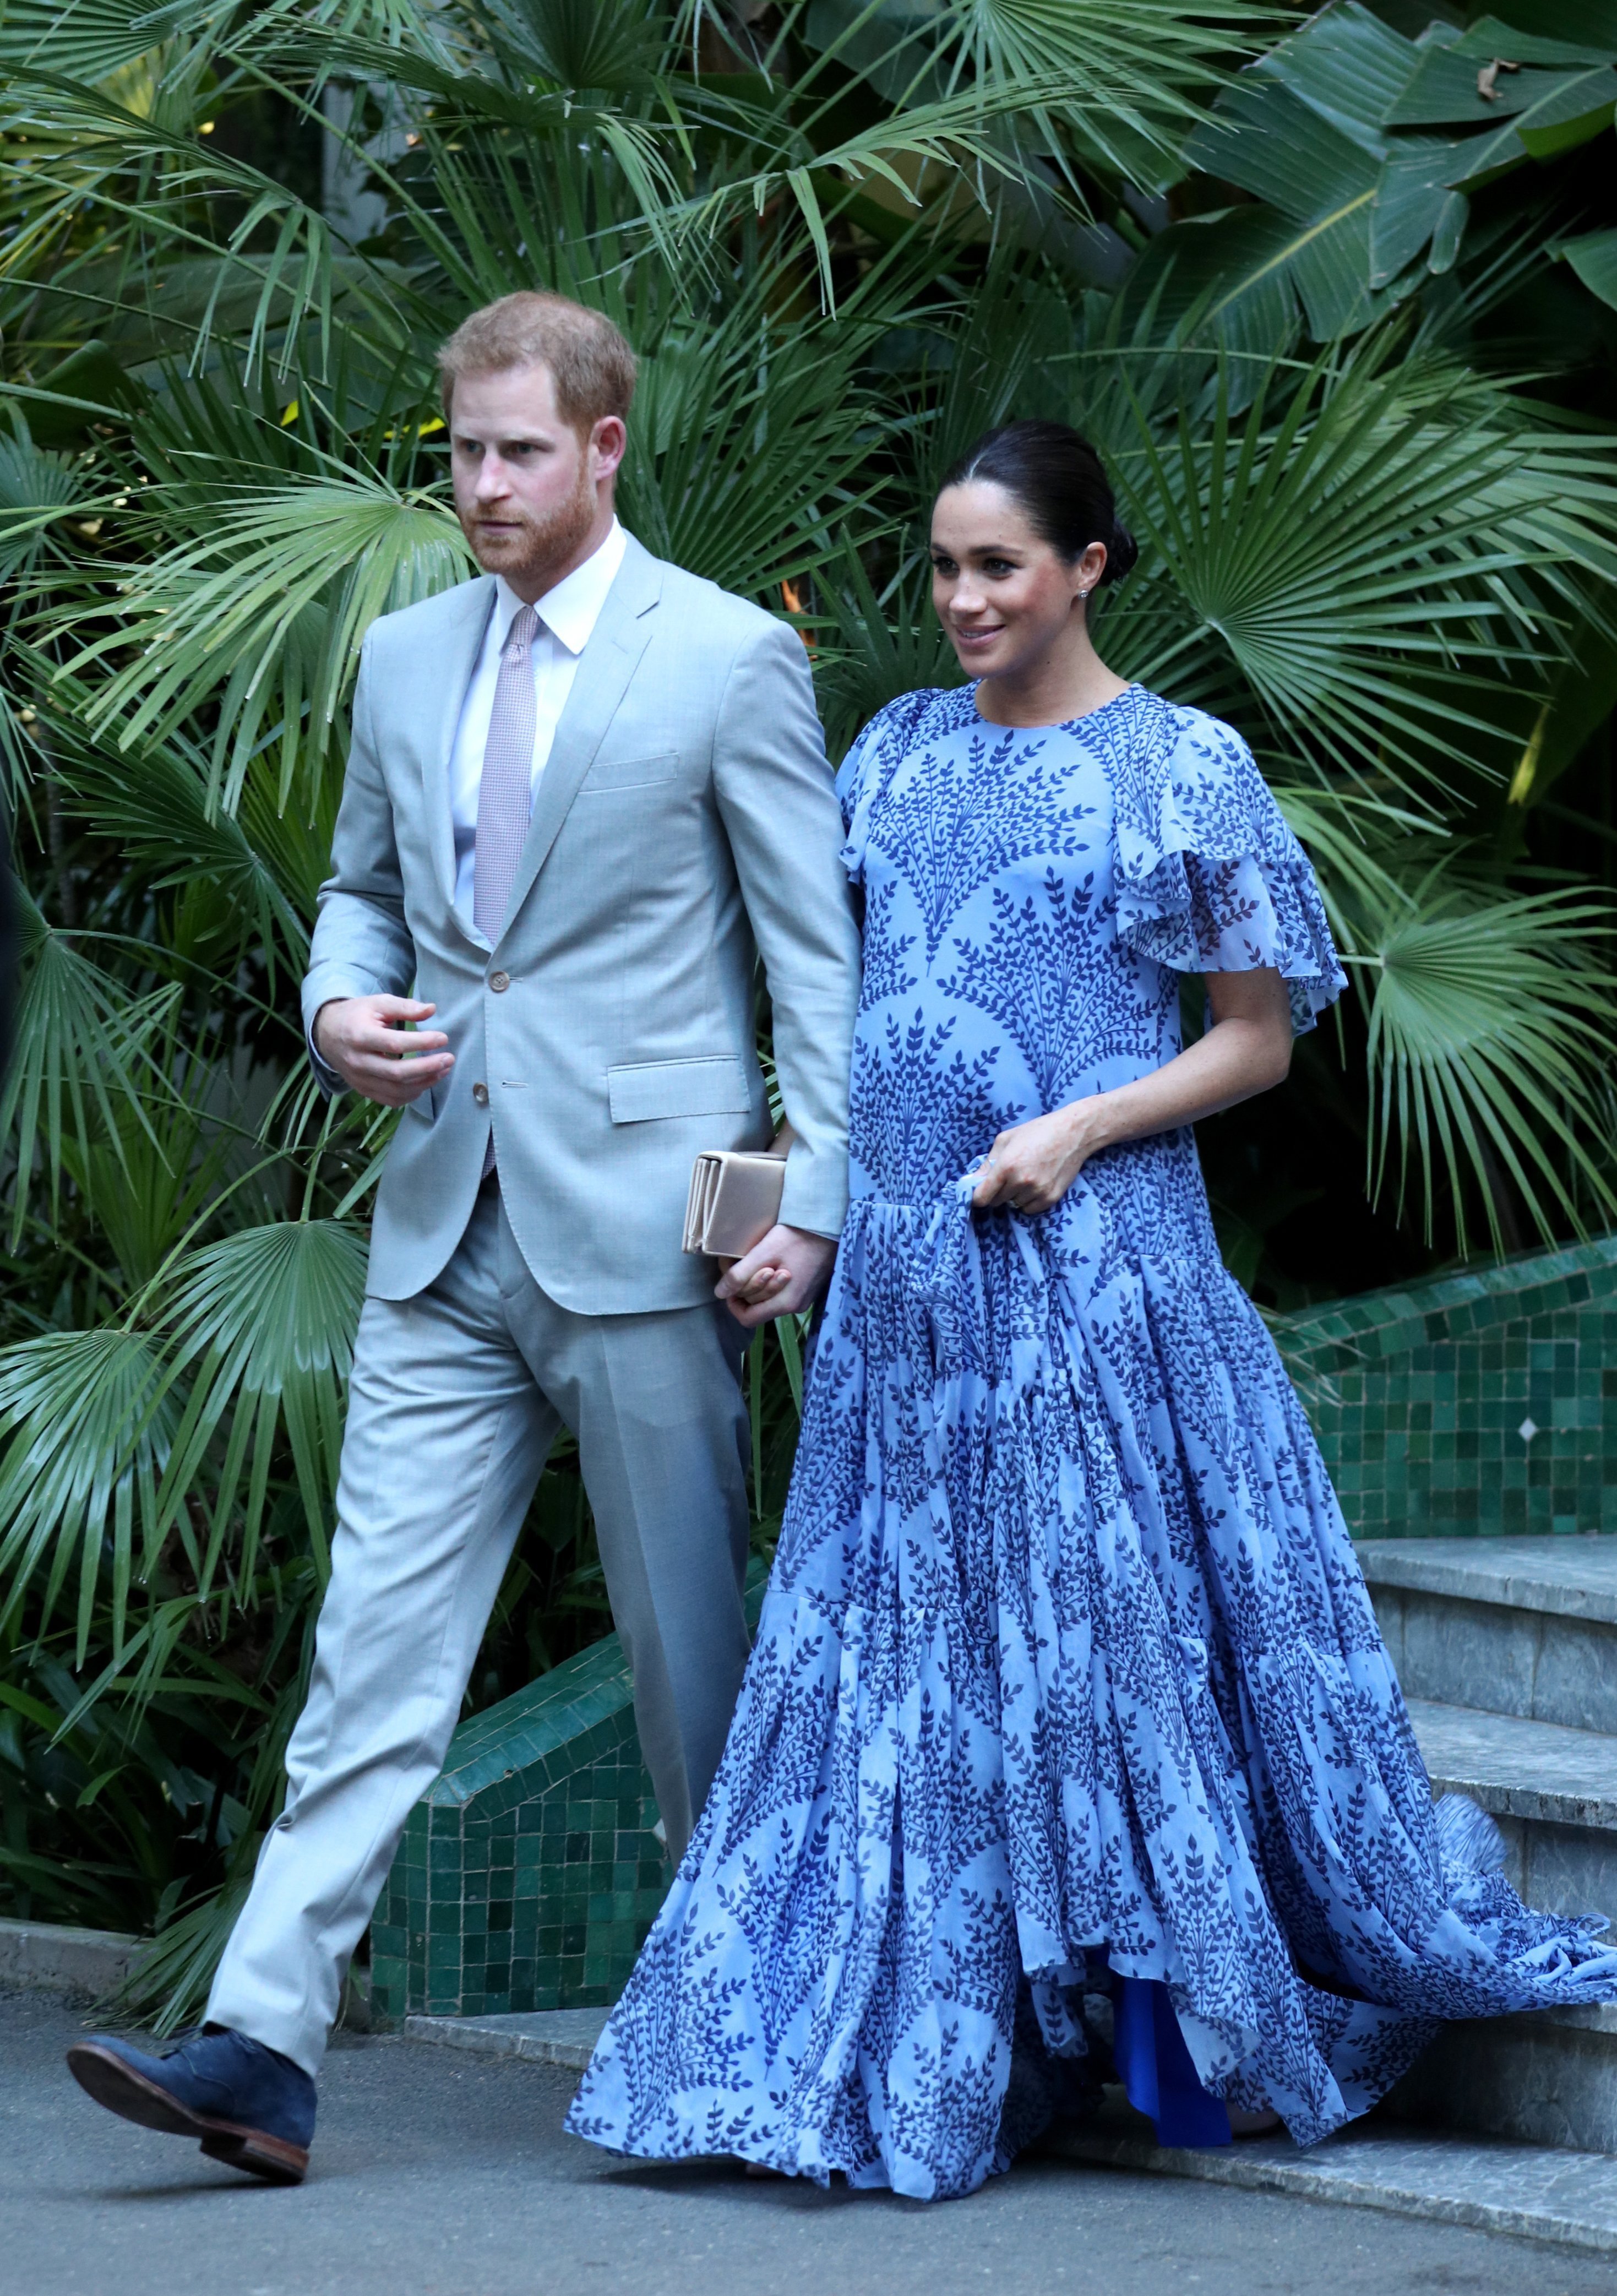 Meghan Markle and her husband Prince Harry | Photo: Getty Images